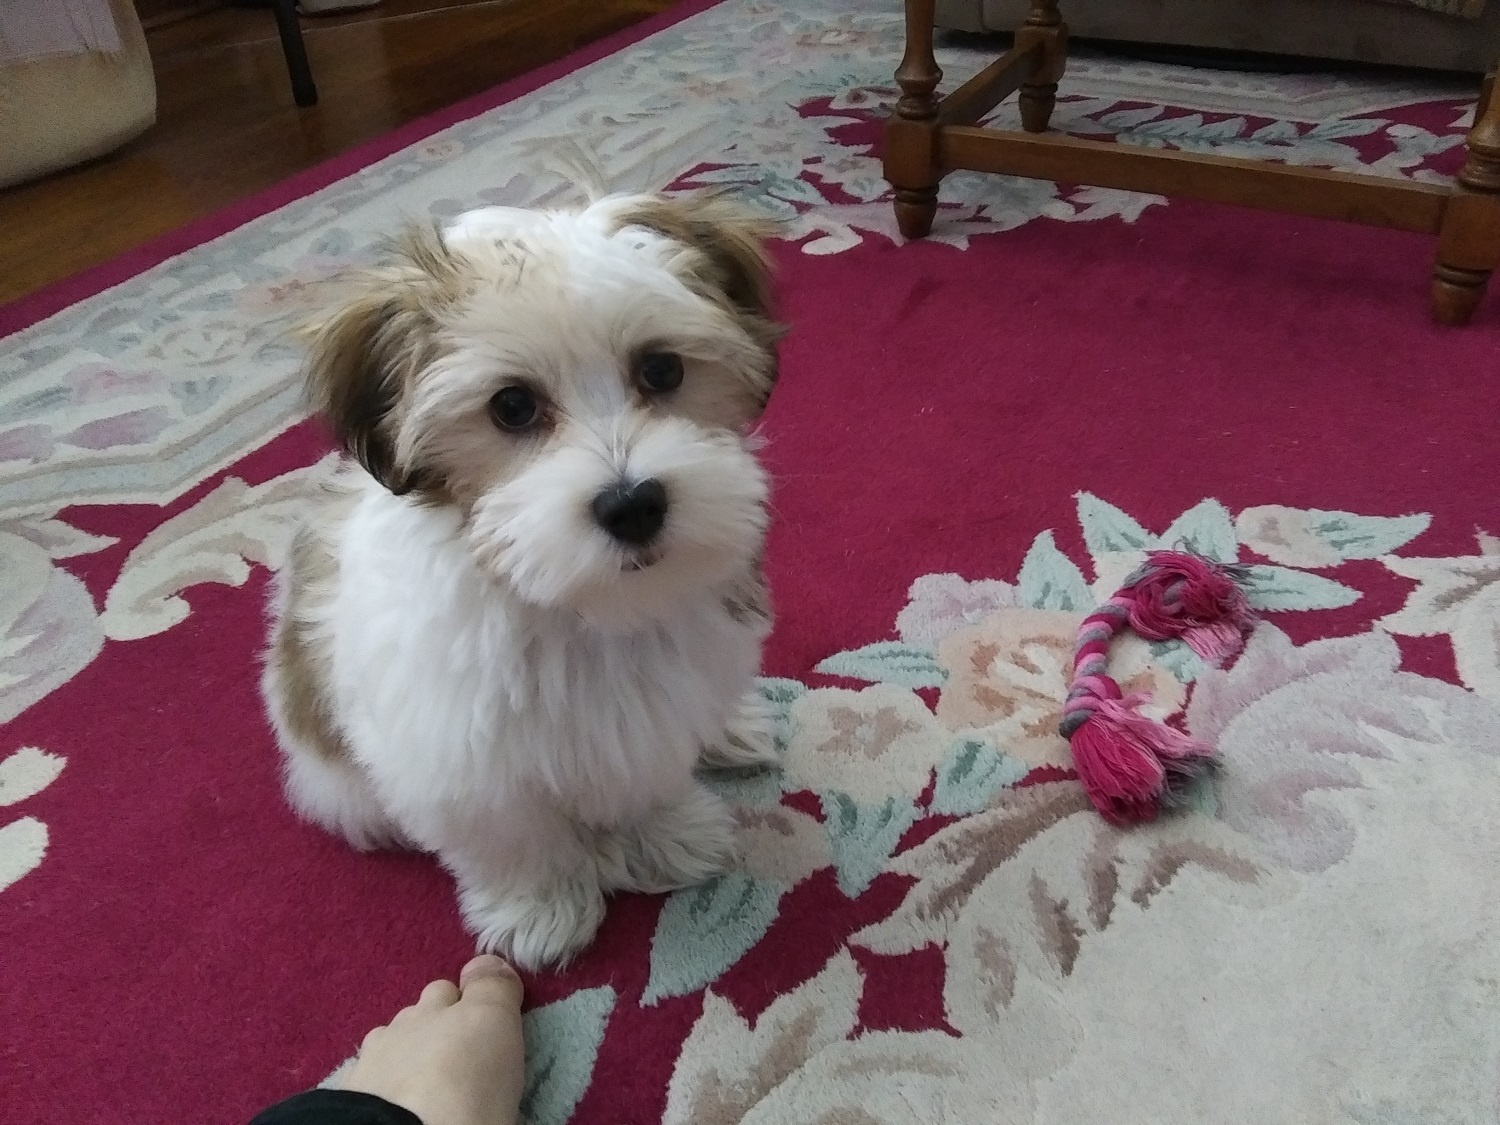 A 14-week-old Havanese puppy sitting and looking at the camera